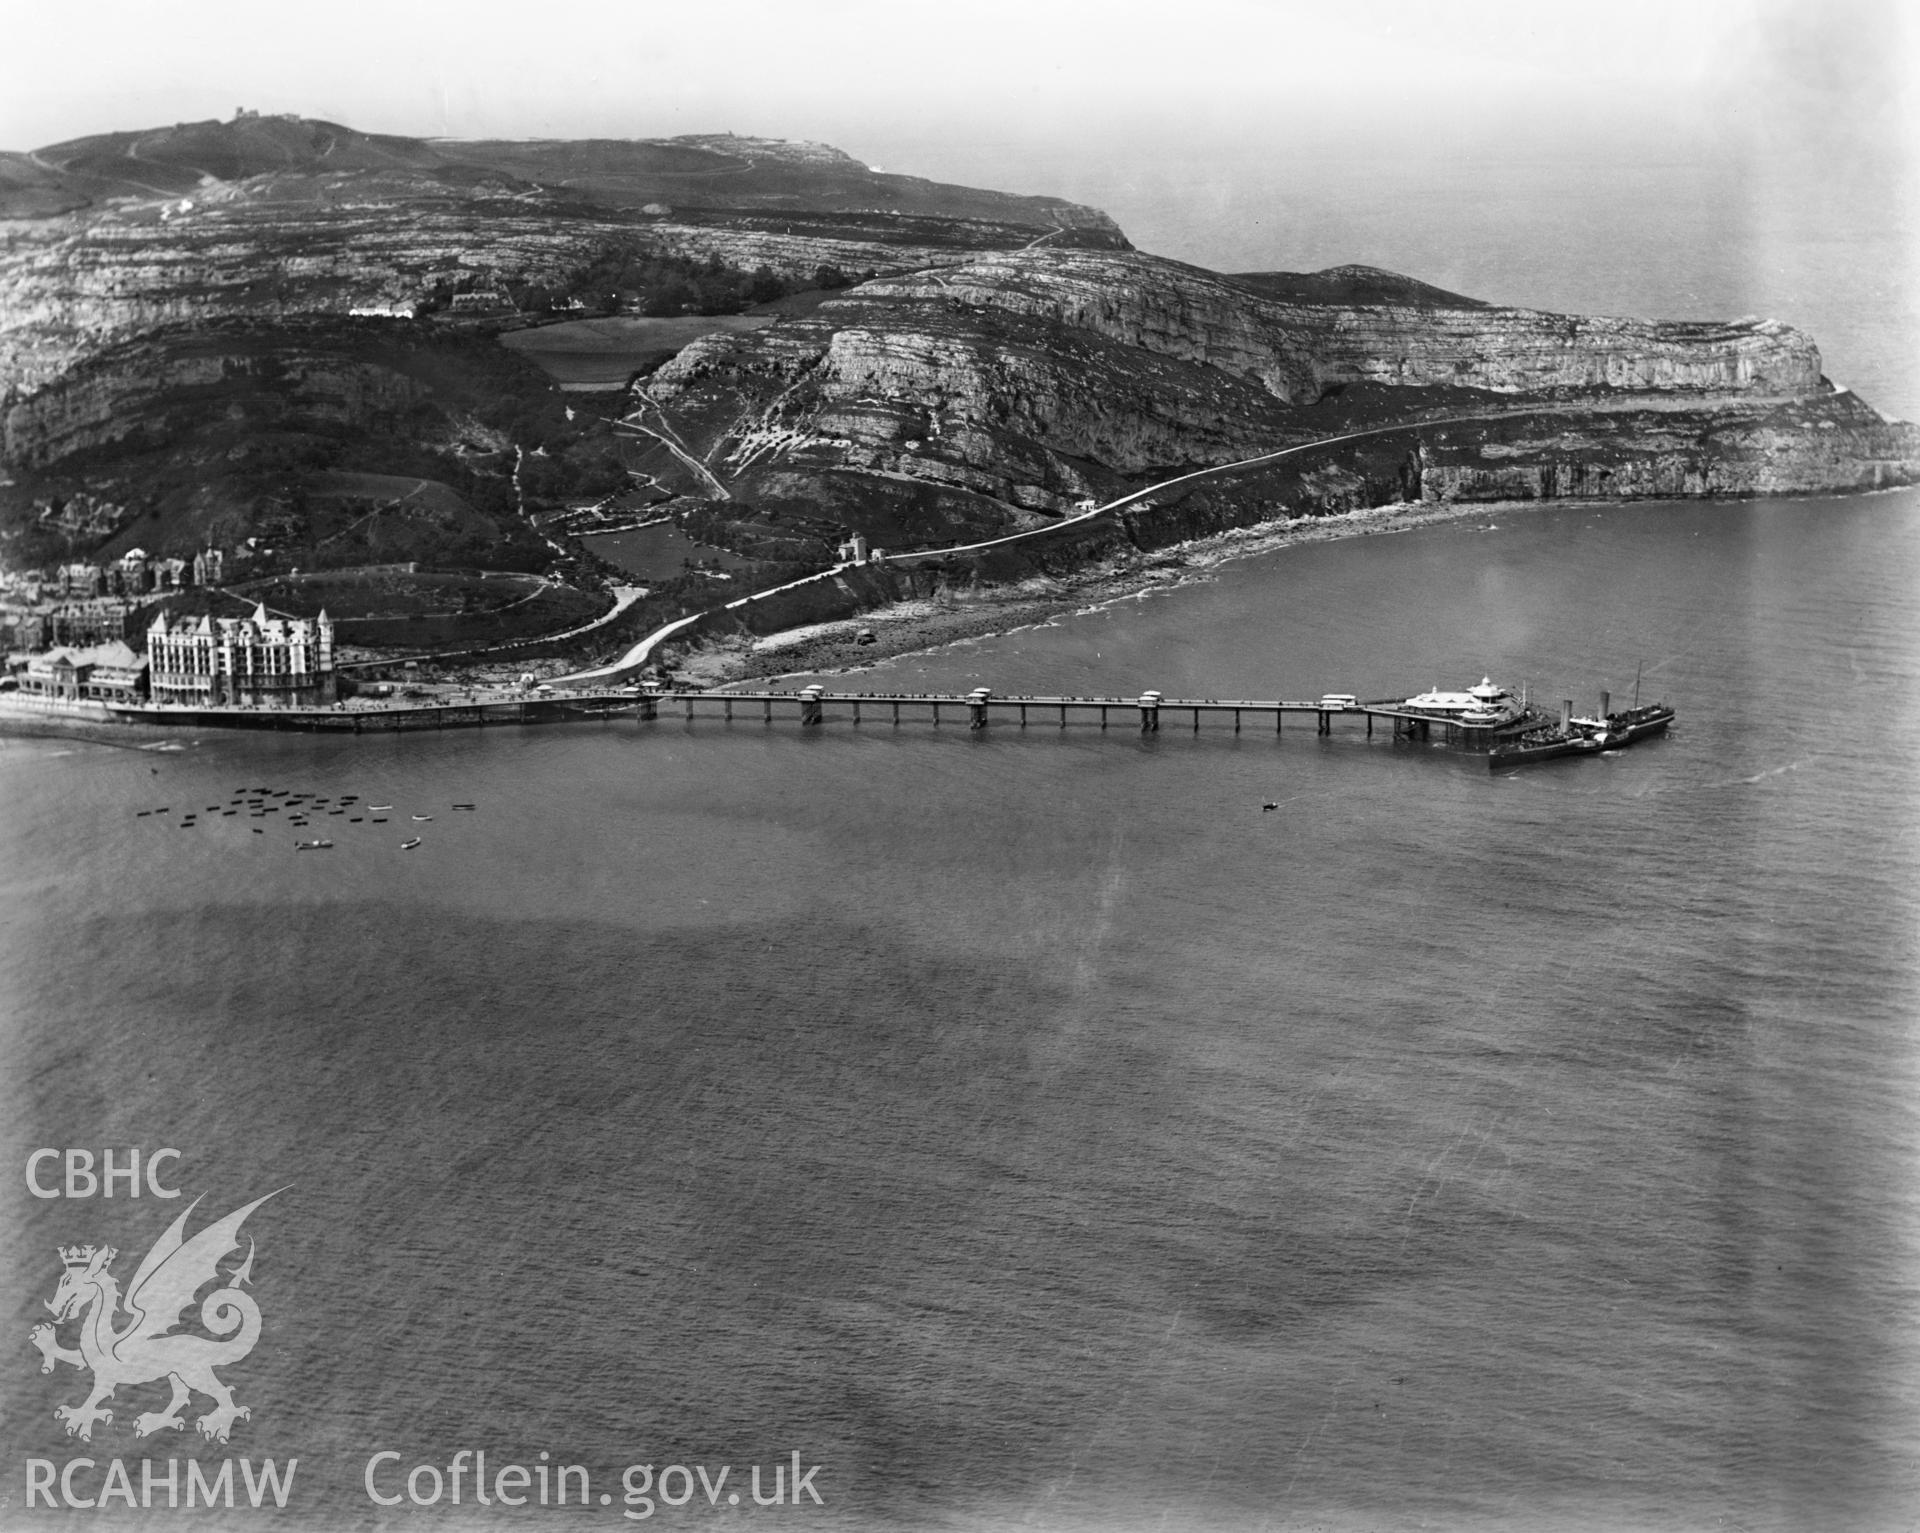 View of Llandudno showing pier, oblique aerial view. 5?x4? black and white glass plate negative.